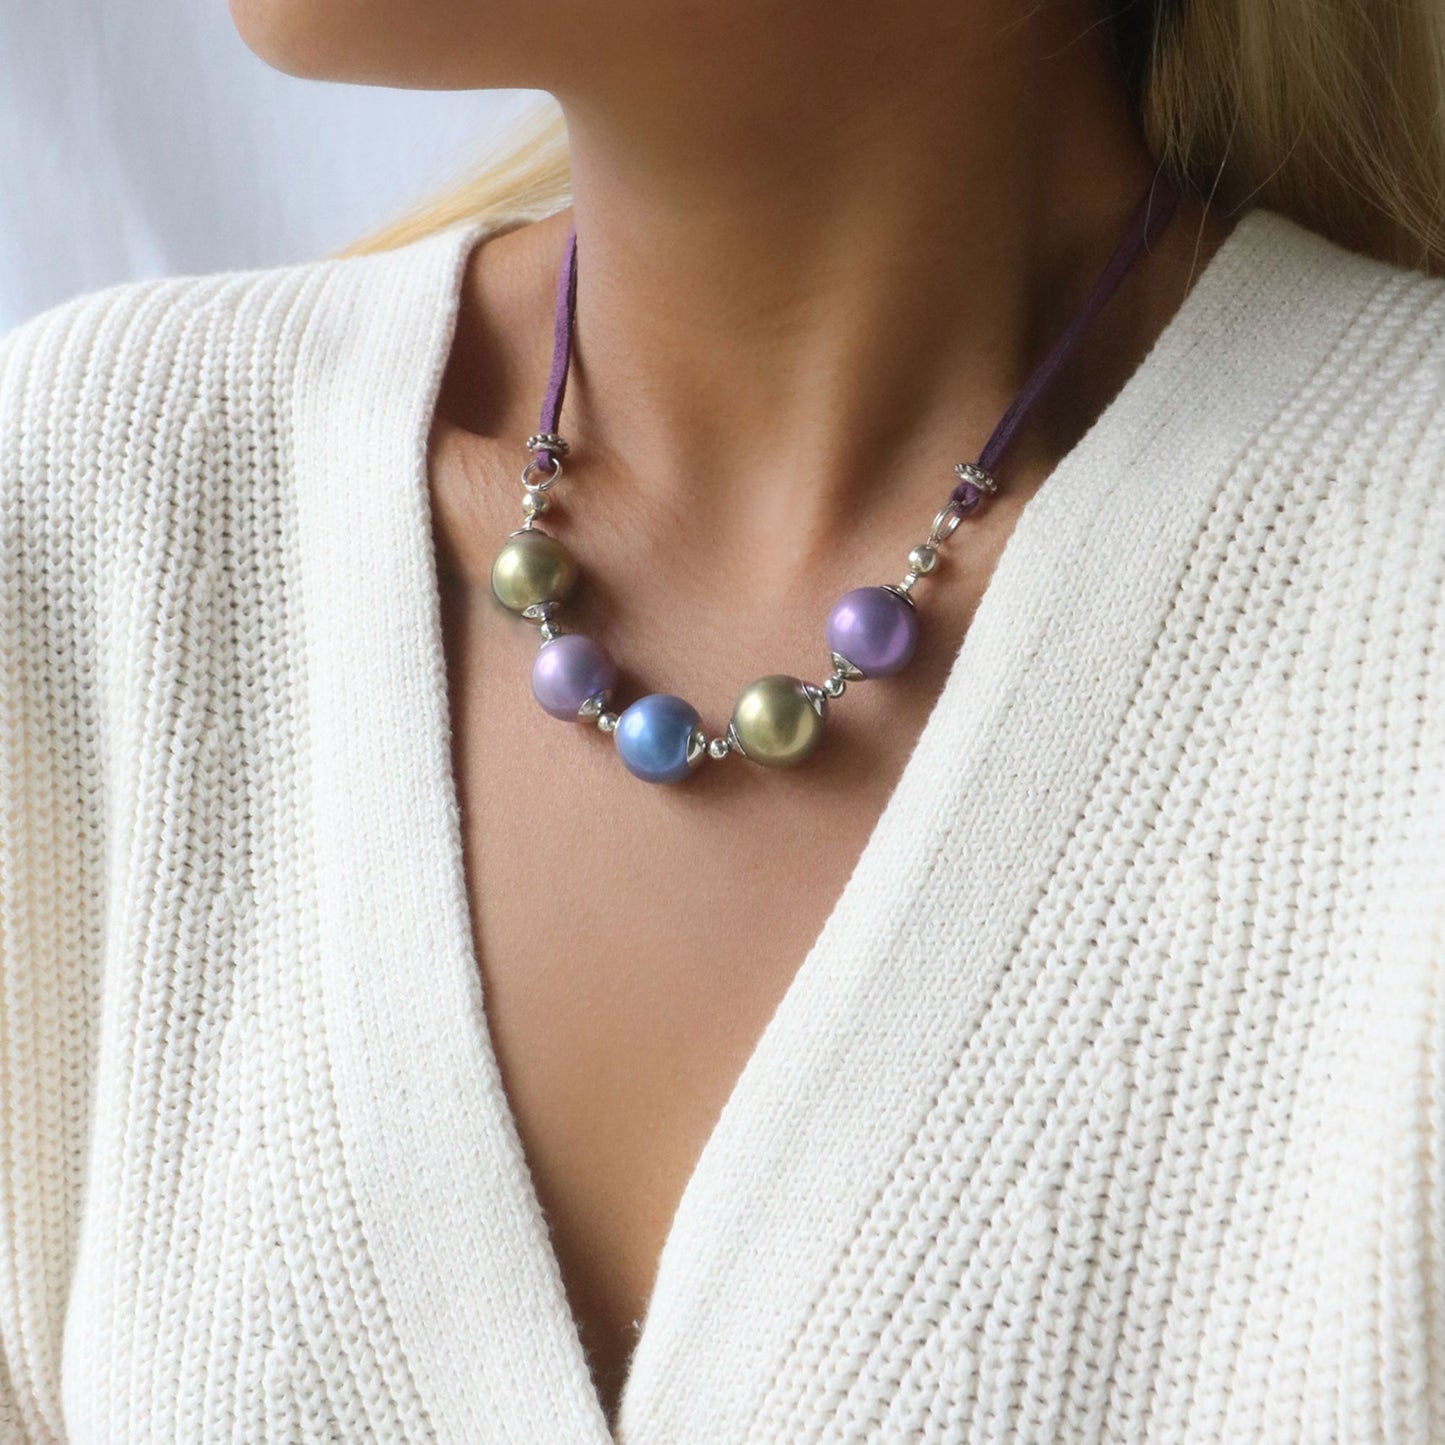 Glass pearl crescent necklace in purple and green